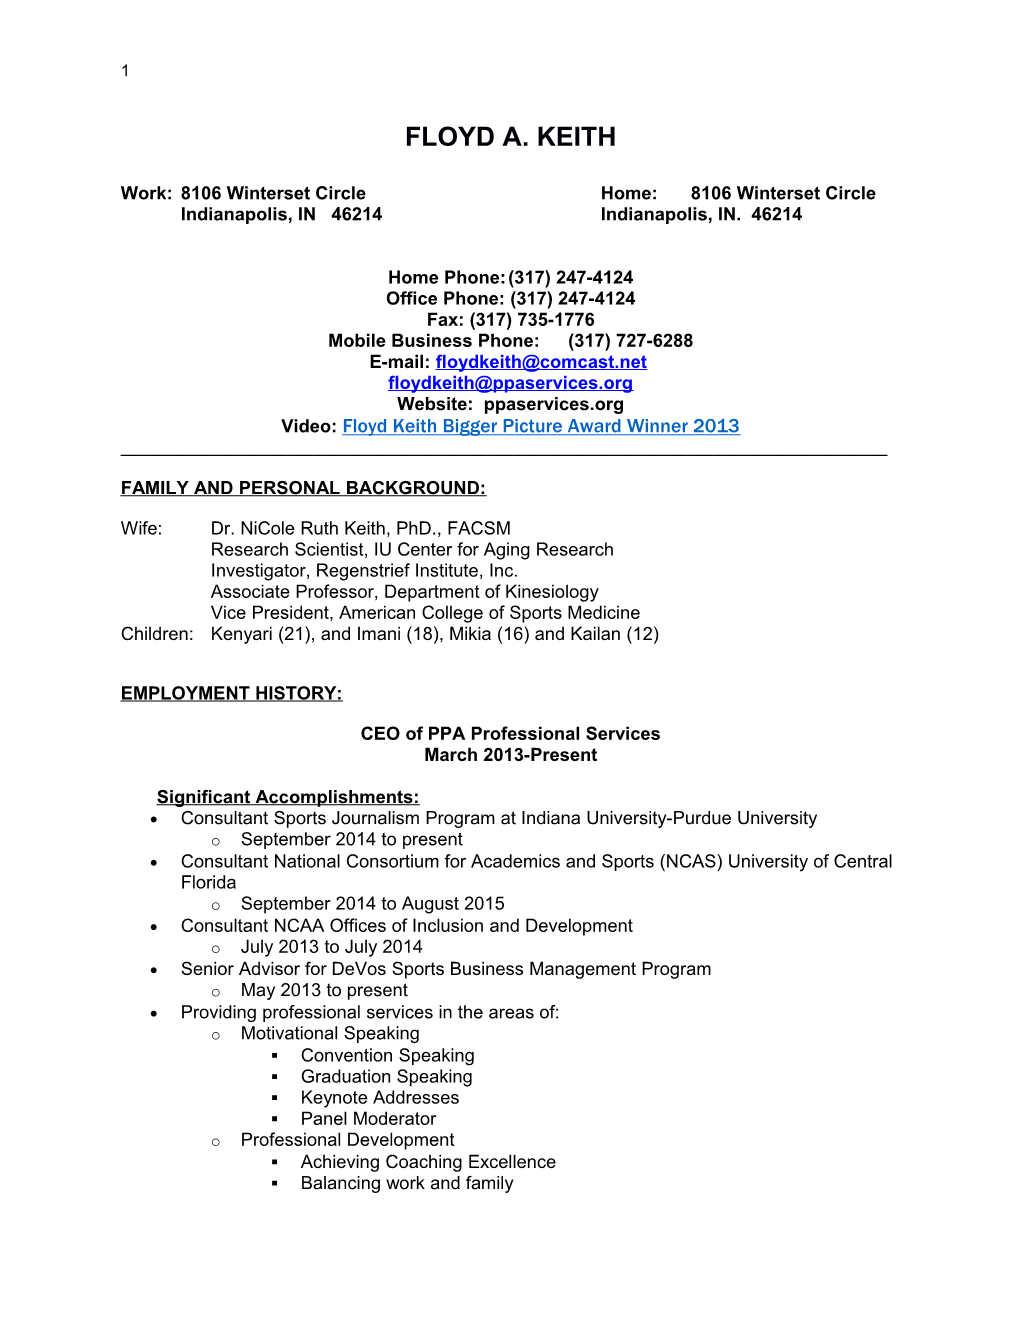 Floyd A. Keith Management Resume